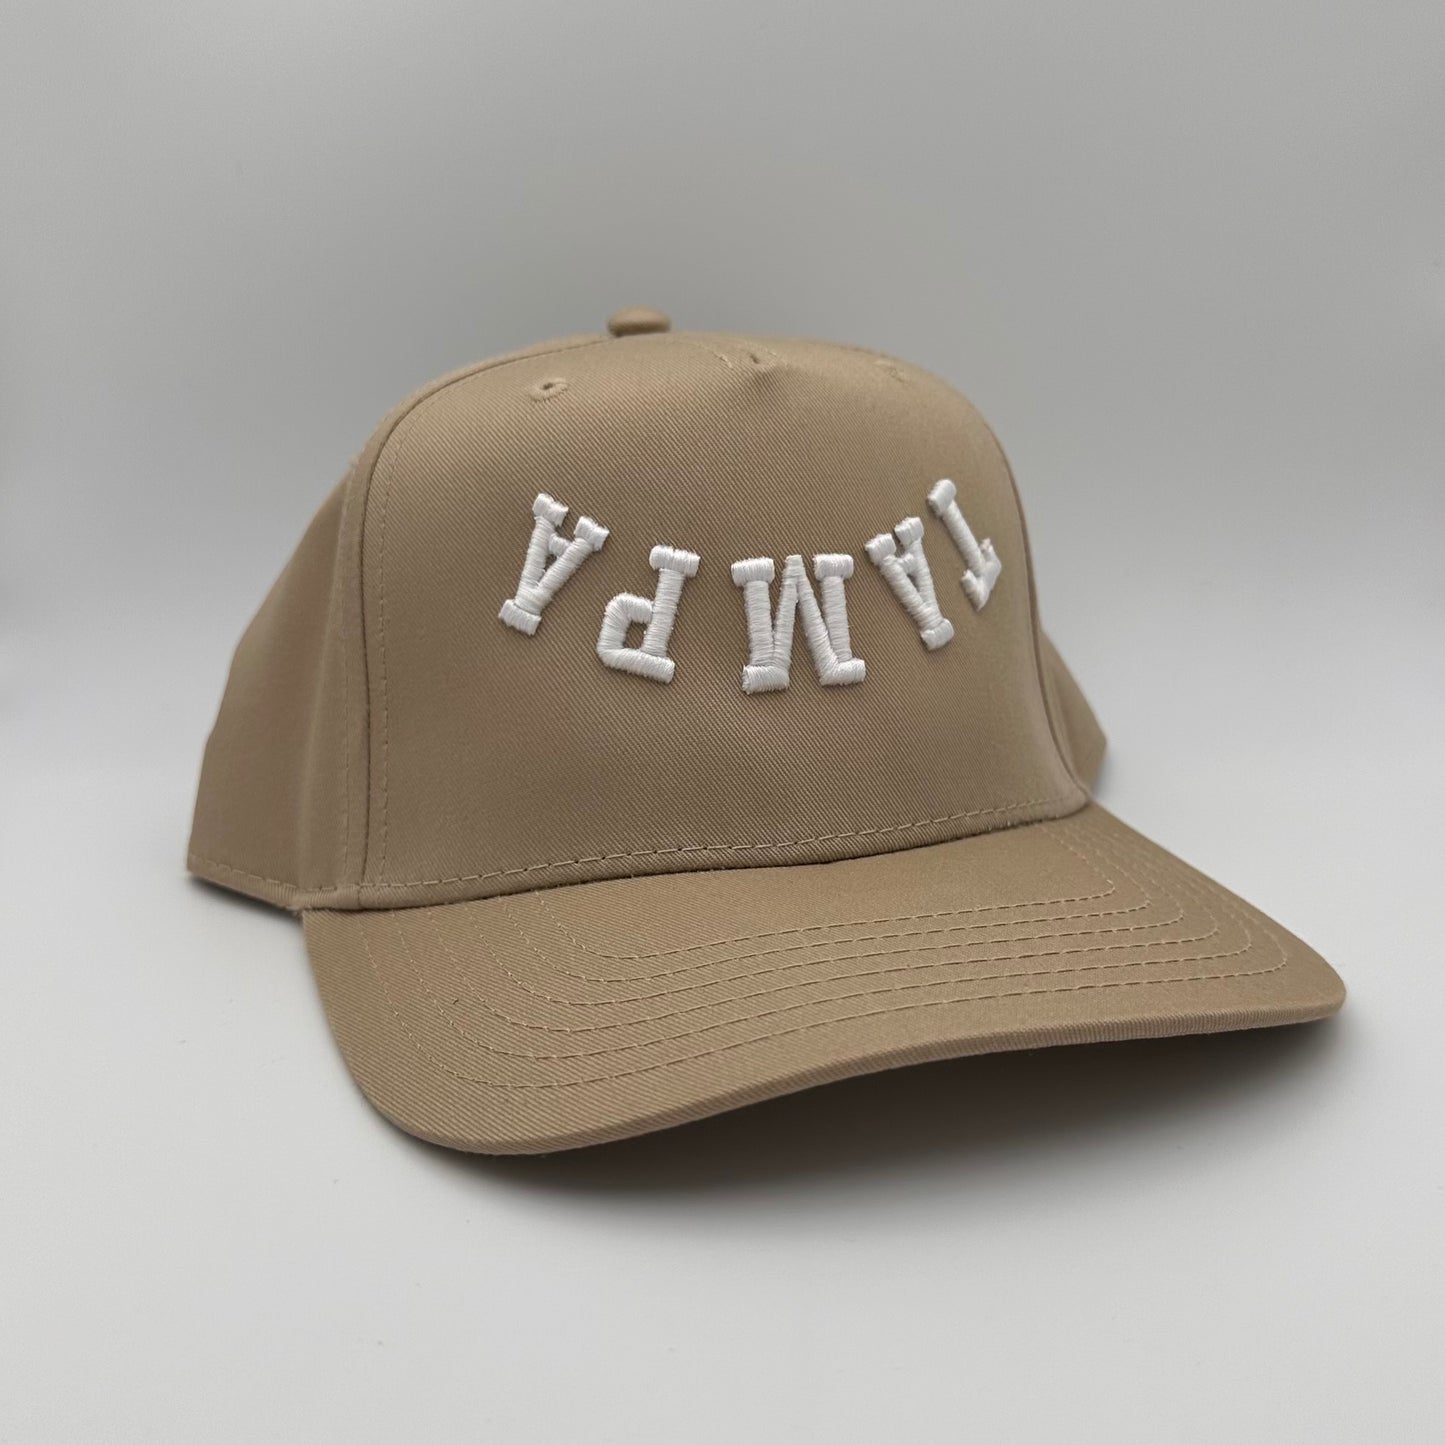 The Tampa Hat - Tan/White